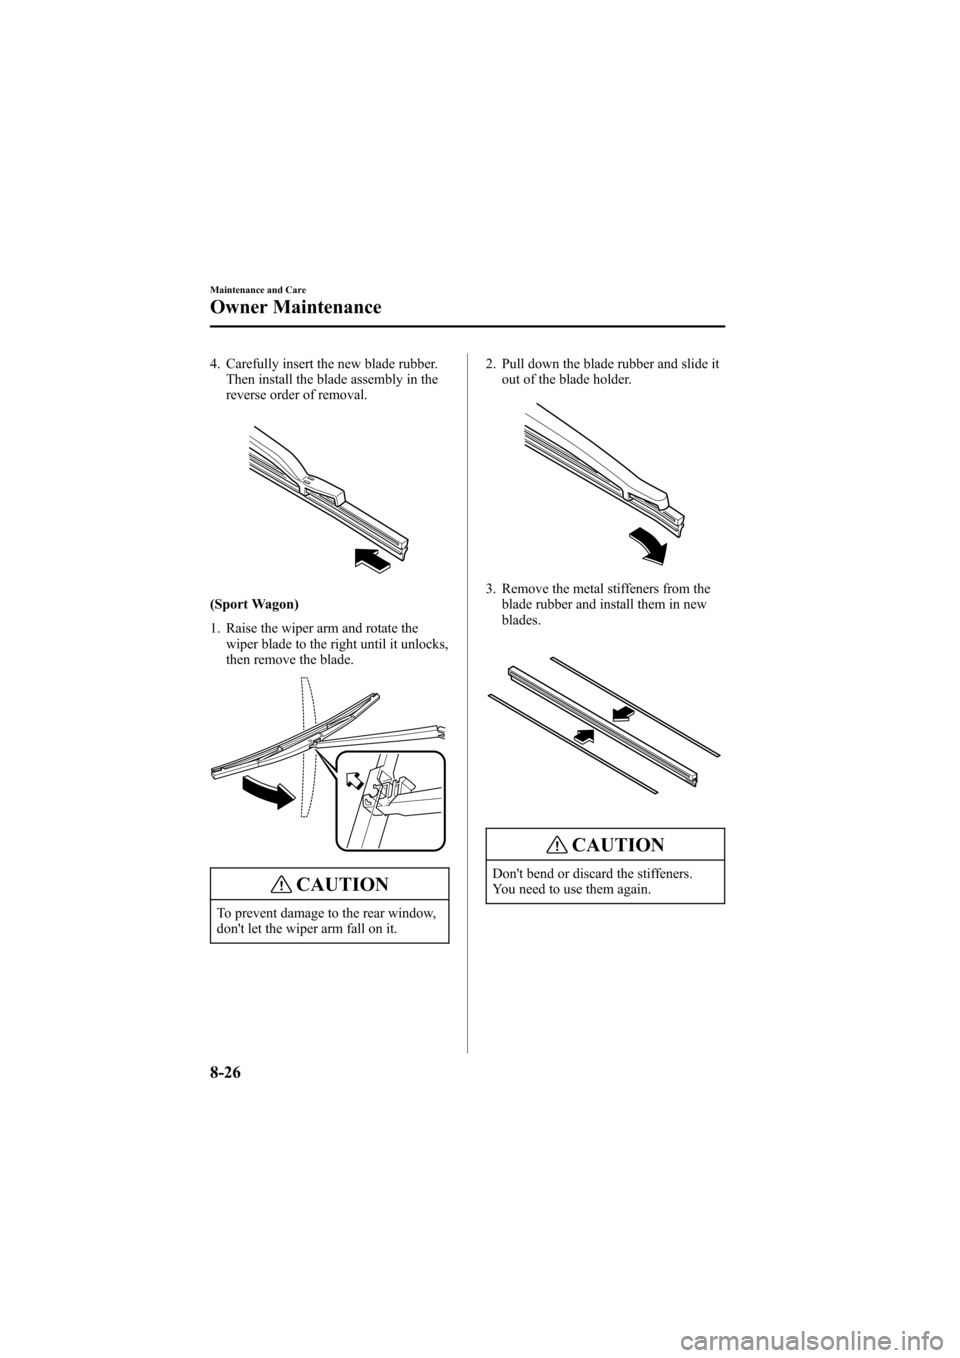 MAZDA MODEL 6 2005   (in English) Owners Guide Black plate (276,1)
4. Carefully insert the new blade rubber.
Then install the blade assembly in the
reverse order of removal.
(Sport Wagon)
1. Raise the wiper arm and rotate the
wiper blade to the ri